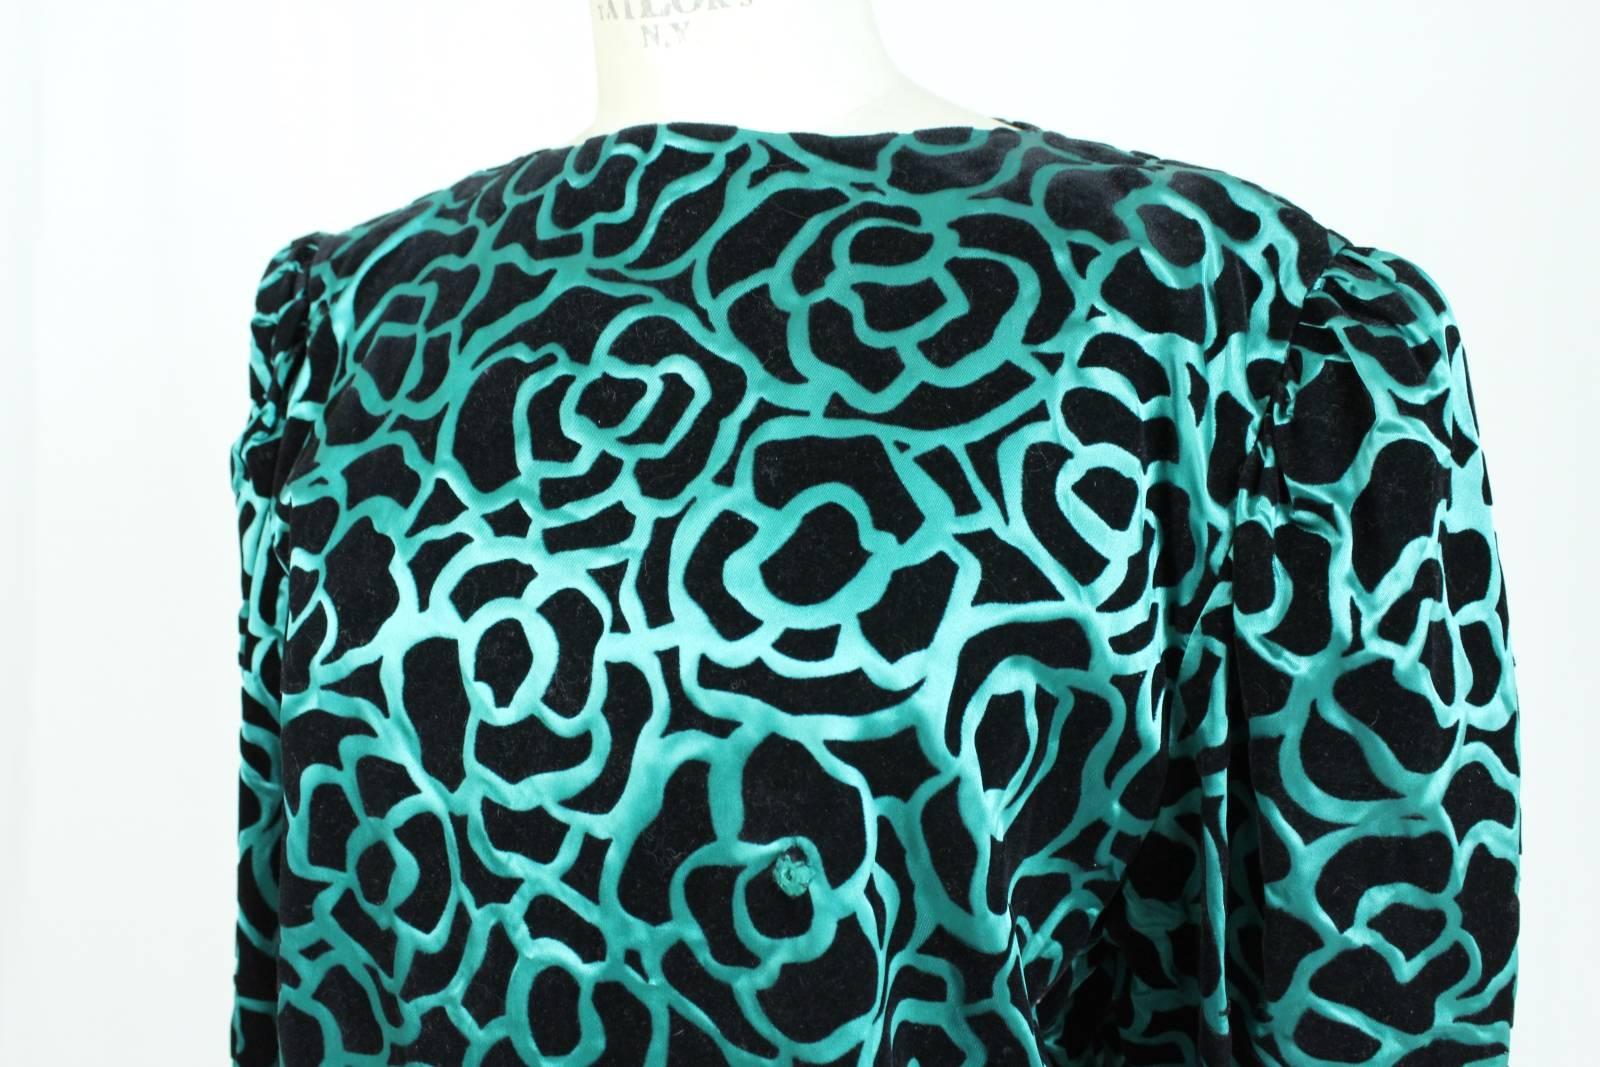 Women's Nina Ricci blouse 1980's vintage baloon sleeves green woman's size 46 For Sale